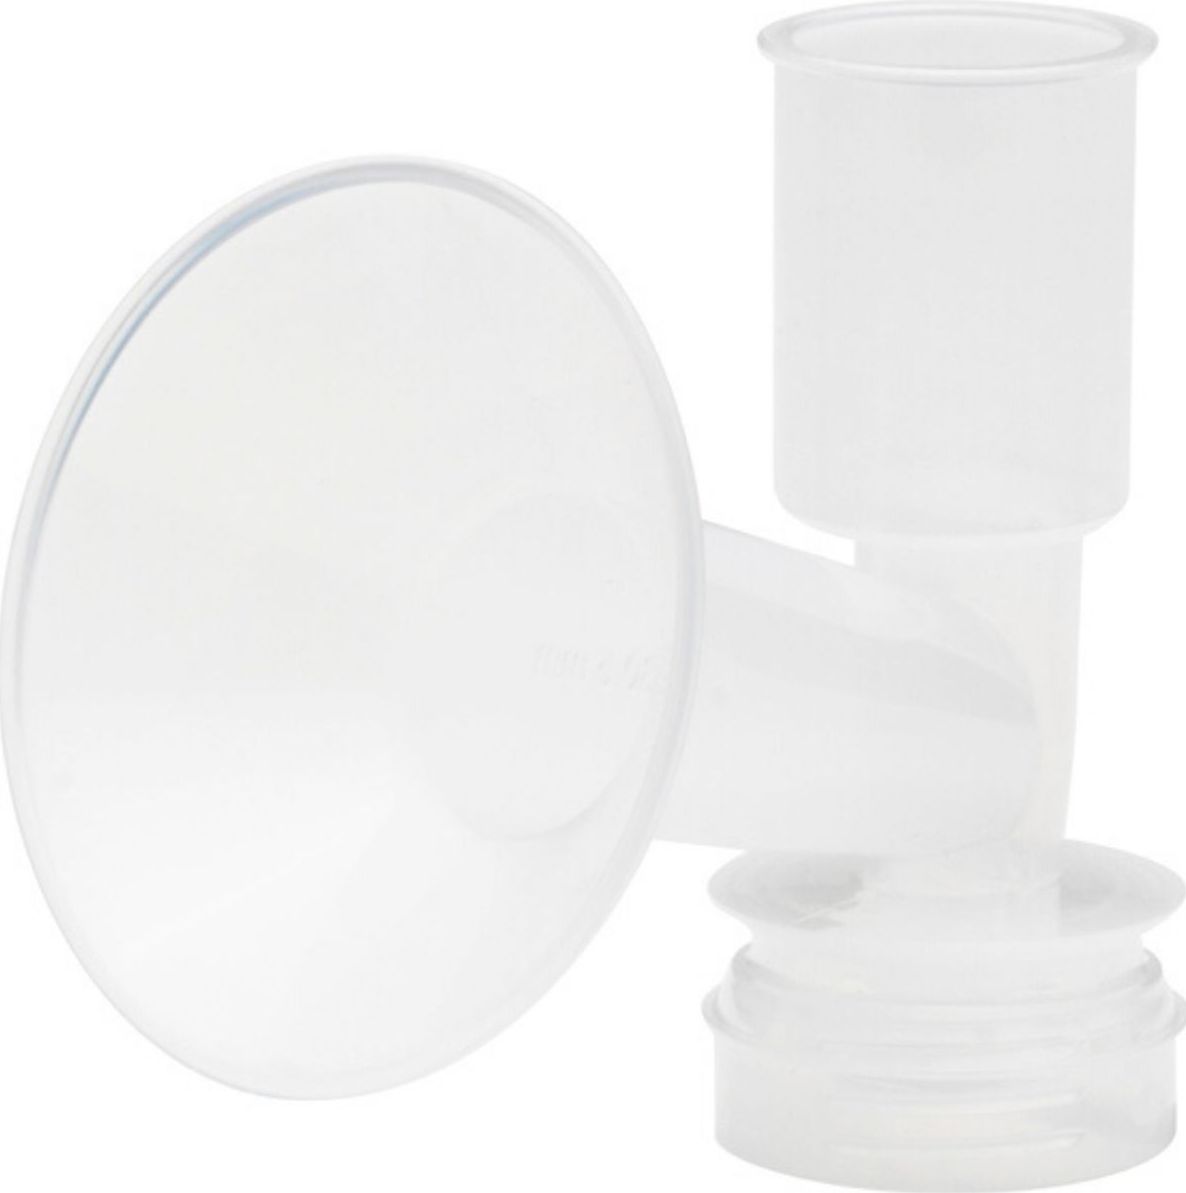 28.5mm cone with direct connection to Ameda breast pump